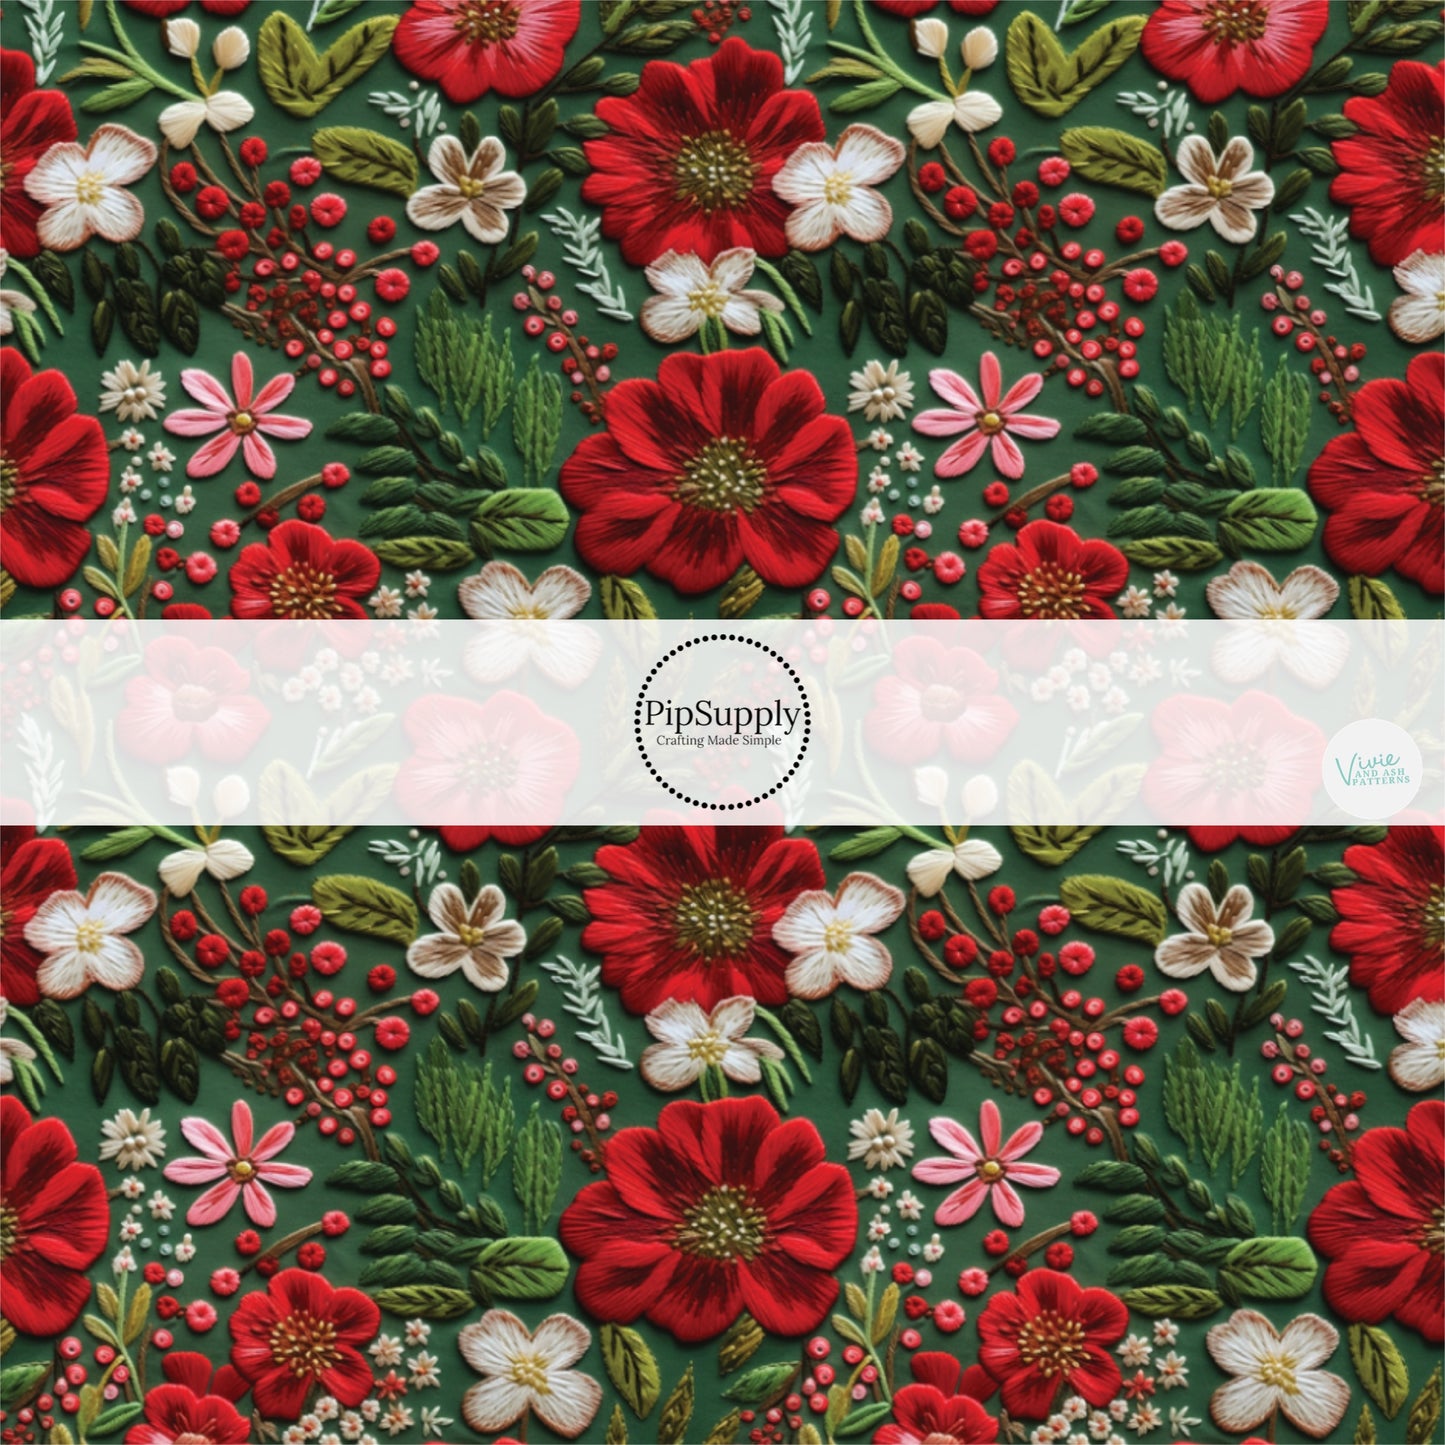 Green fabric by the yard with red and green embroidered florals.